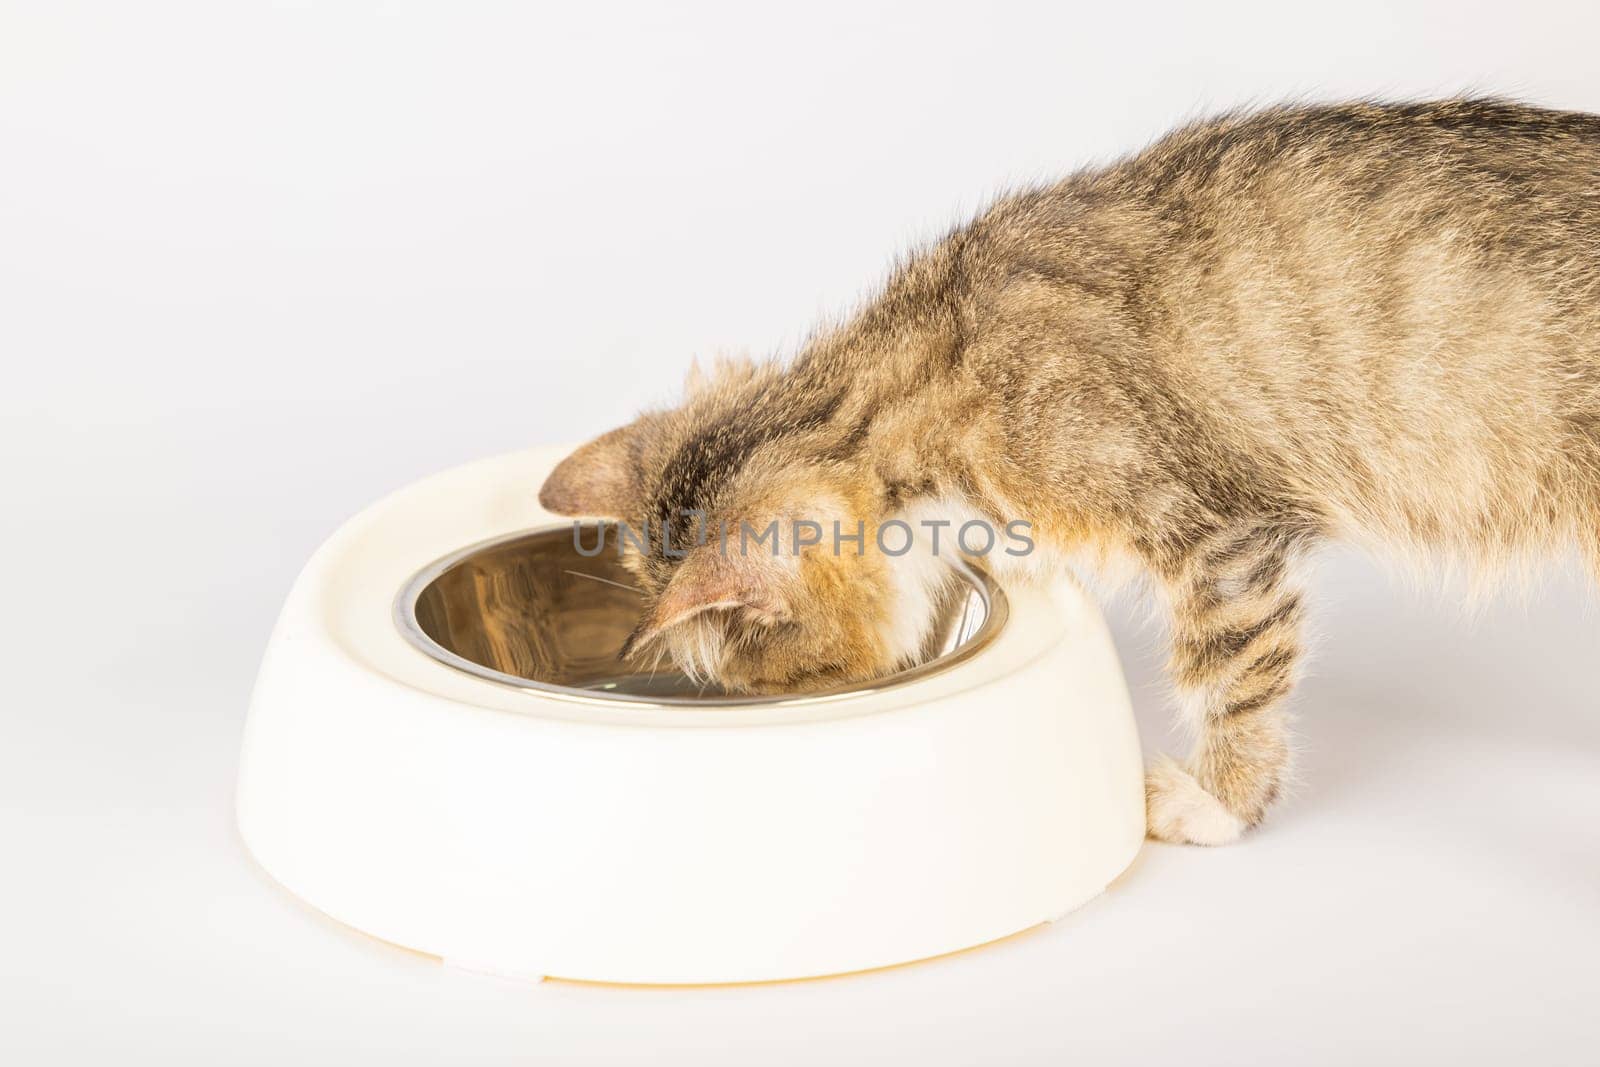 An isolated beautiful tabby cat is sitting next to a food bowl on the floor eating from a heap of food. Its curious eye and small tongue add to the charming portrait of this hungry kitten. by Sorapop